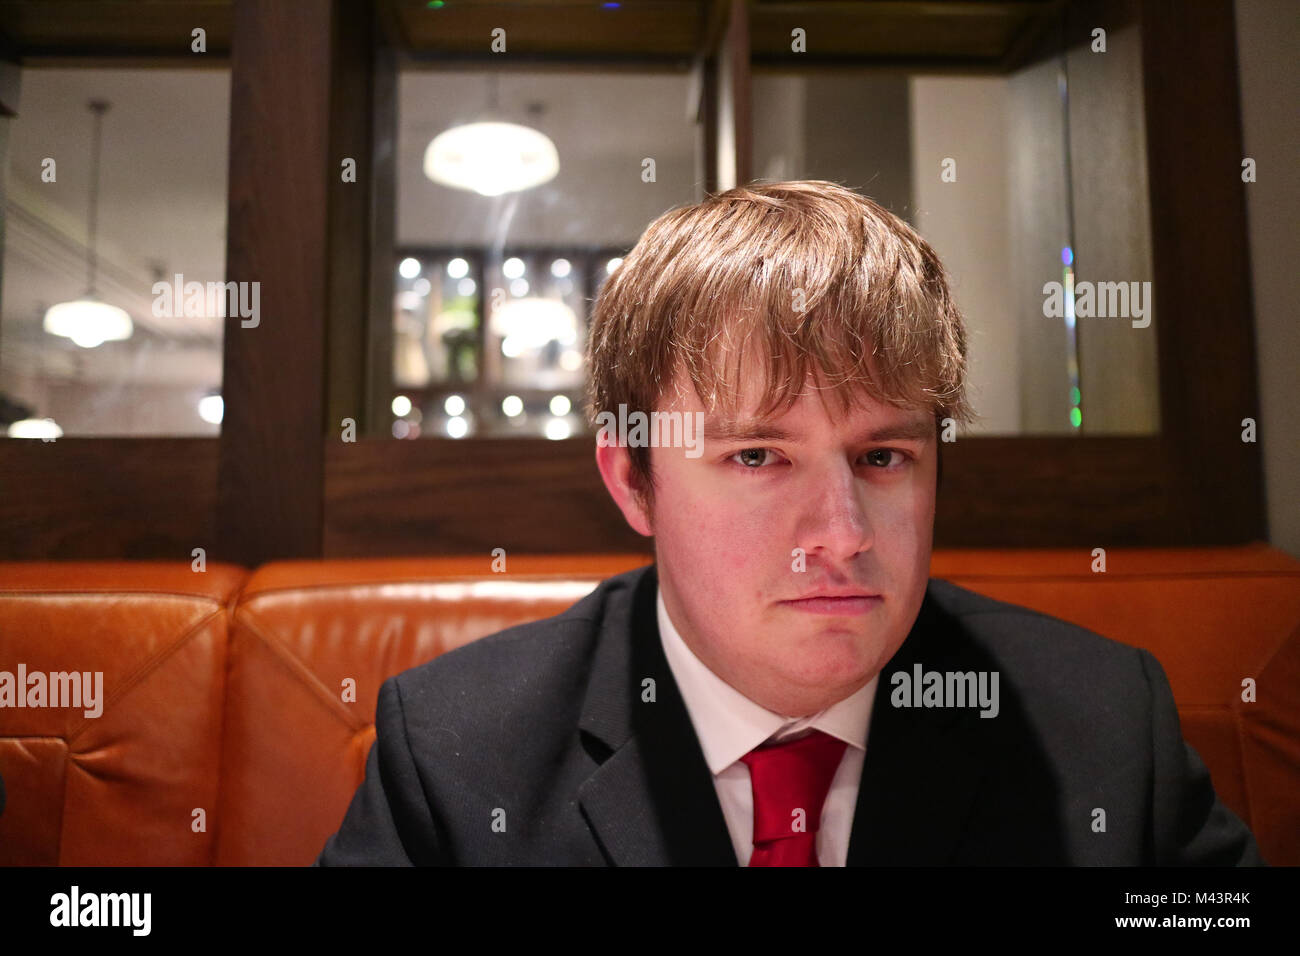 A serious stare into the camera from a suited man, or a smolder. Who knows. Stock Photo